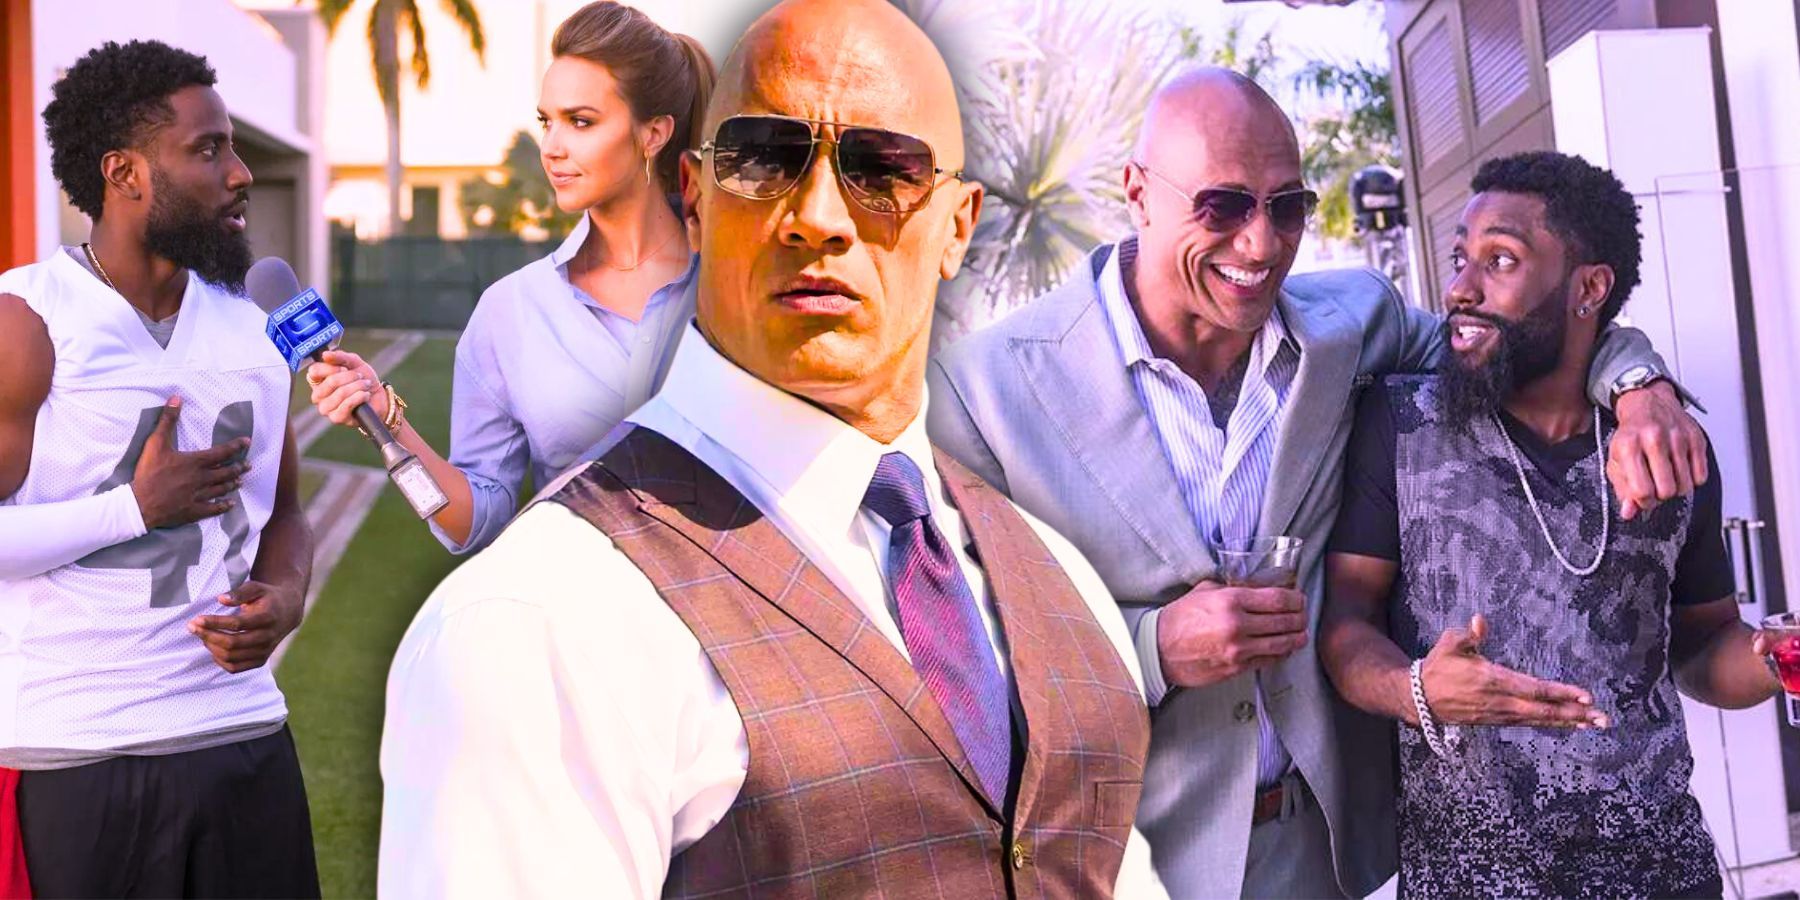 Dwayne Johnson in Ballers with scenes collaged behind